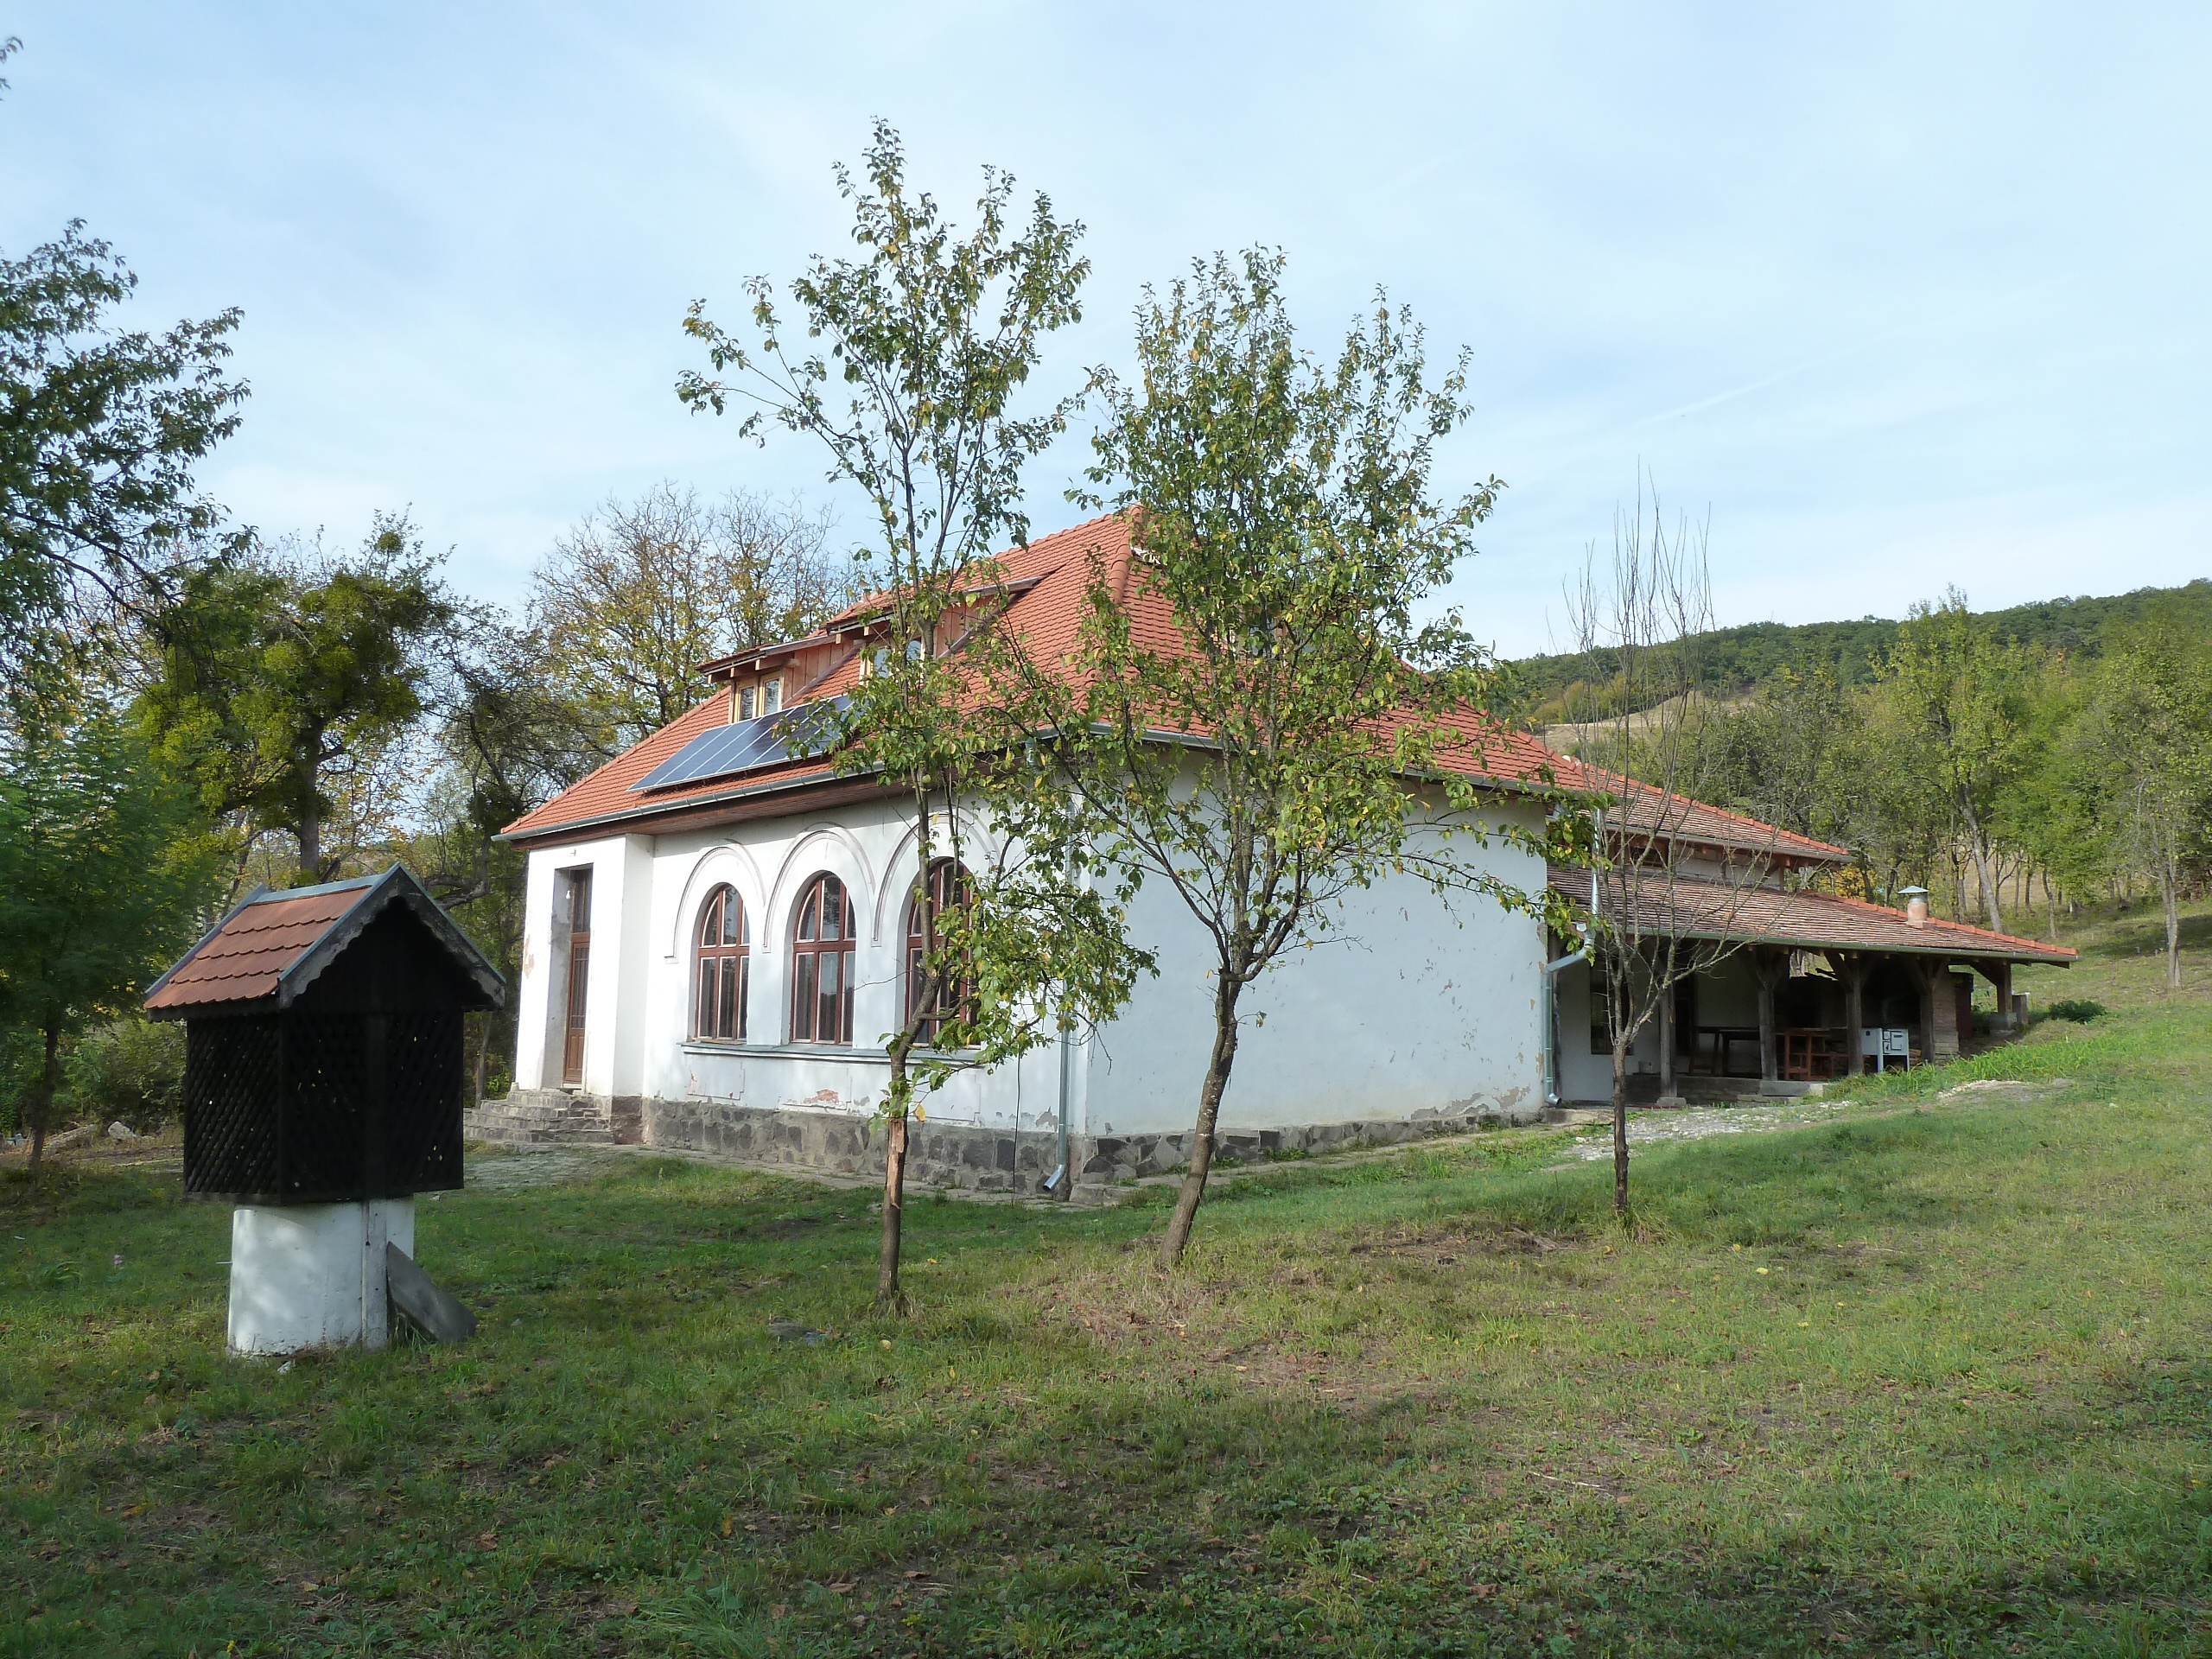 In the Angofa Valley, the former schoolhouse is now the Angofa Wildlife Centre.